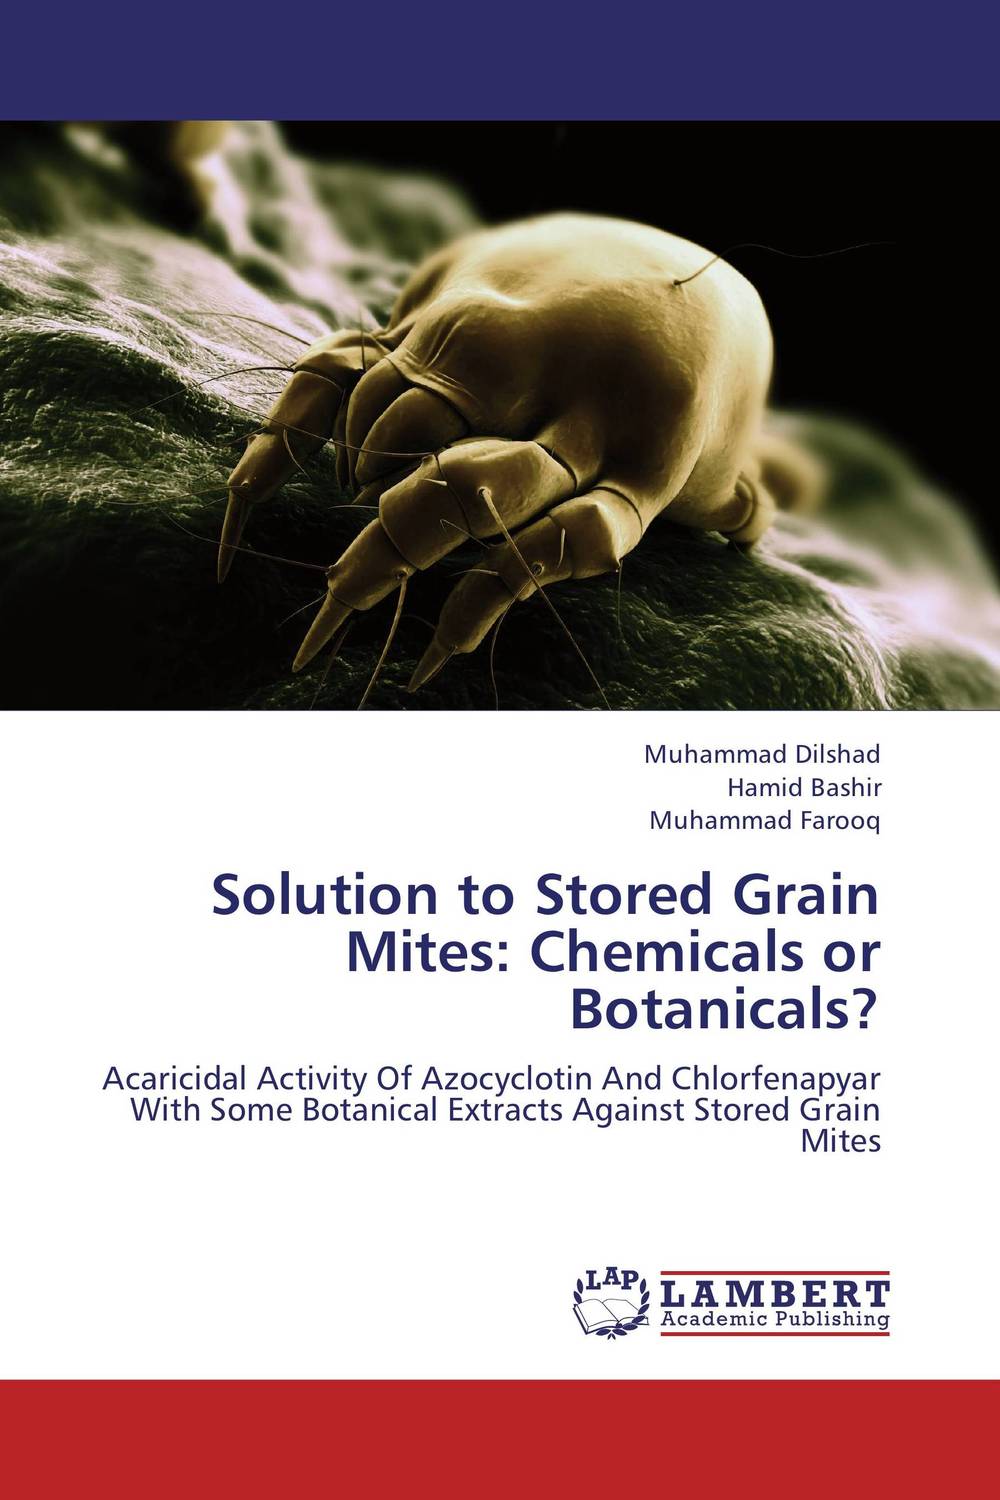 Solution to Stored Grain Mites: Chemicals or Botanicals?